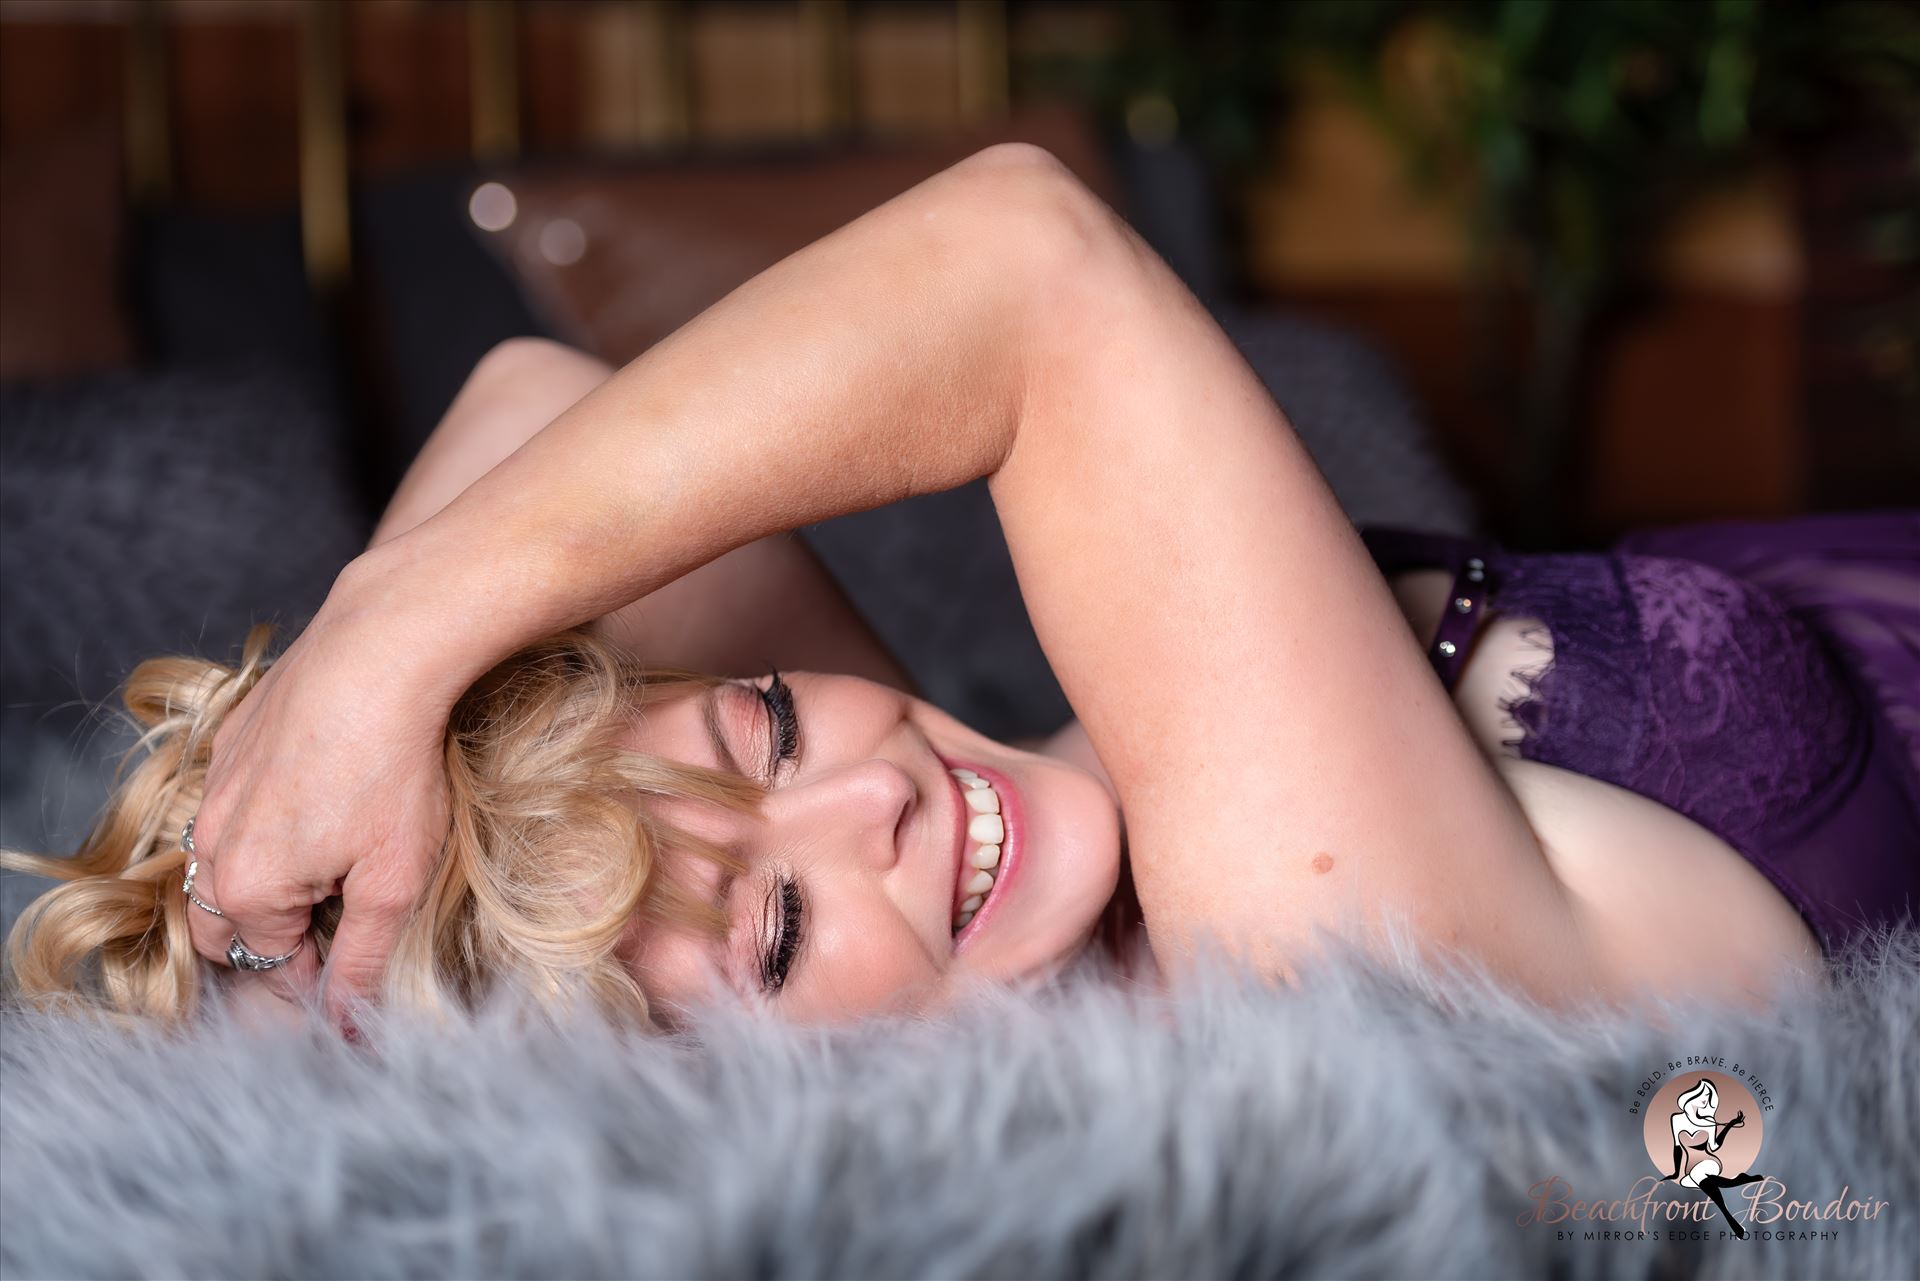 Mrs. A Smiles Beachfront Boudoir by Mirror's Edge Photography is a Boutique Luxury Boudoir Photography Studio located just blocks from the beach in Oceano, California. My mission is to show as many women as possible how beautiful they truly are! Beautiful blonde smile. by Sarah Williams